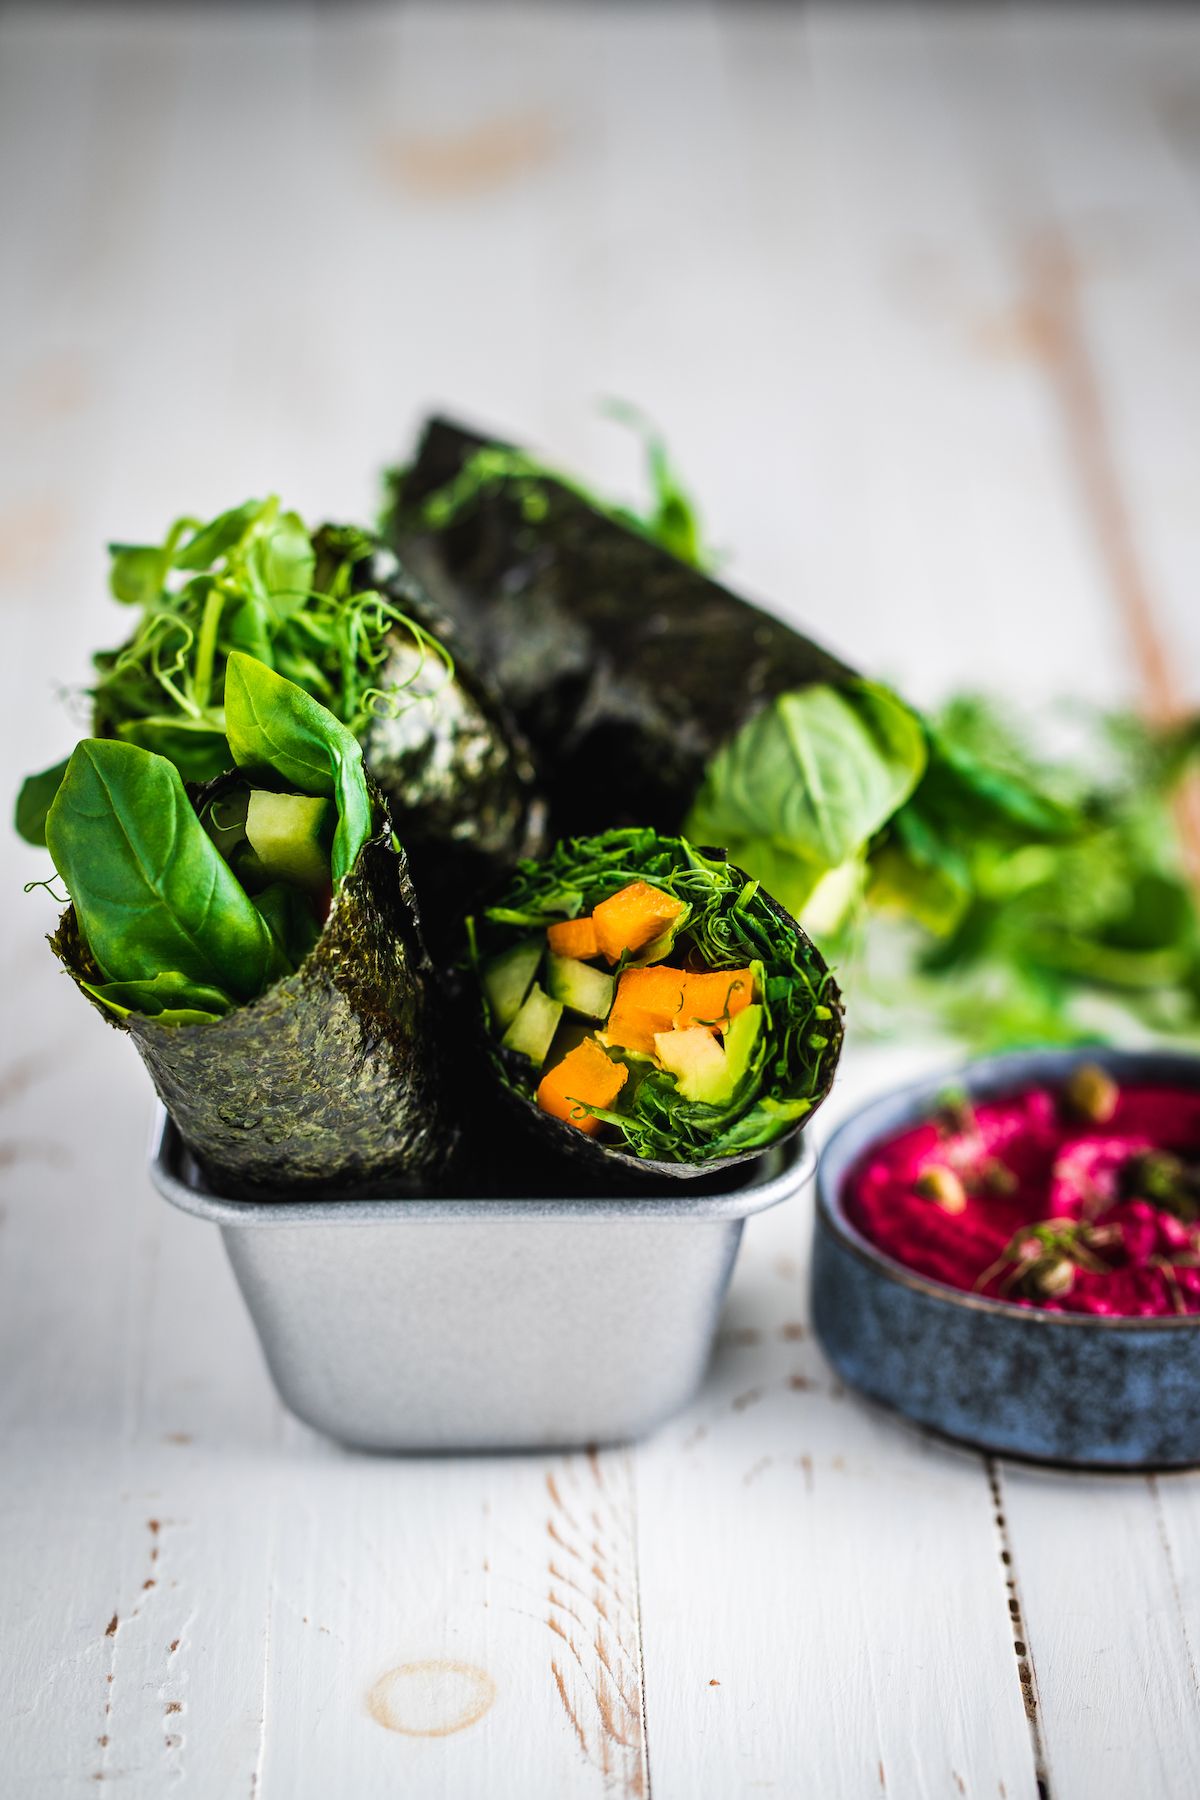 Simple Raw Nori Wraps with Beet Dipping Sauce